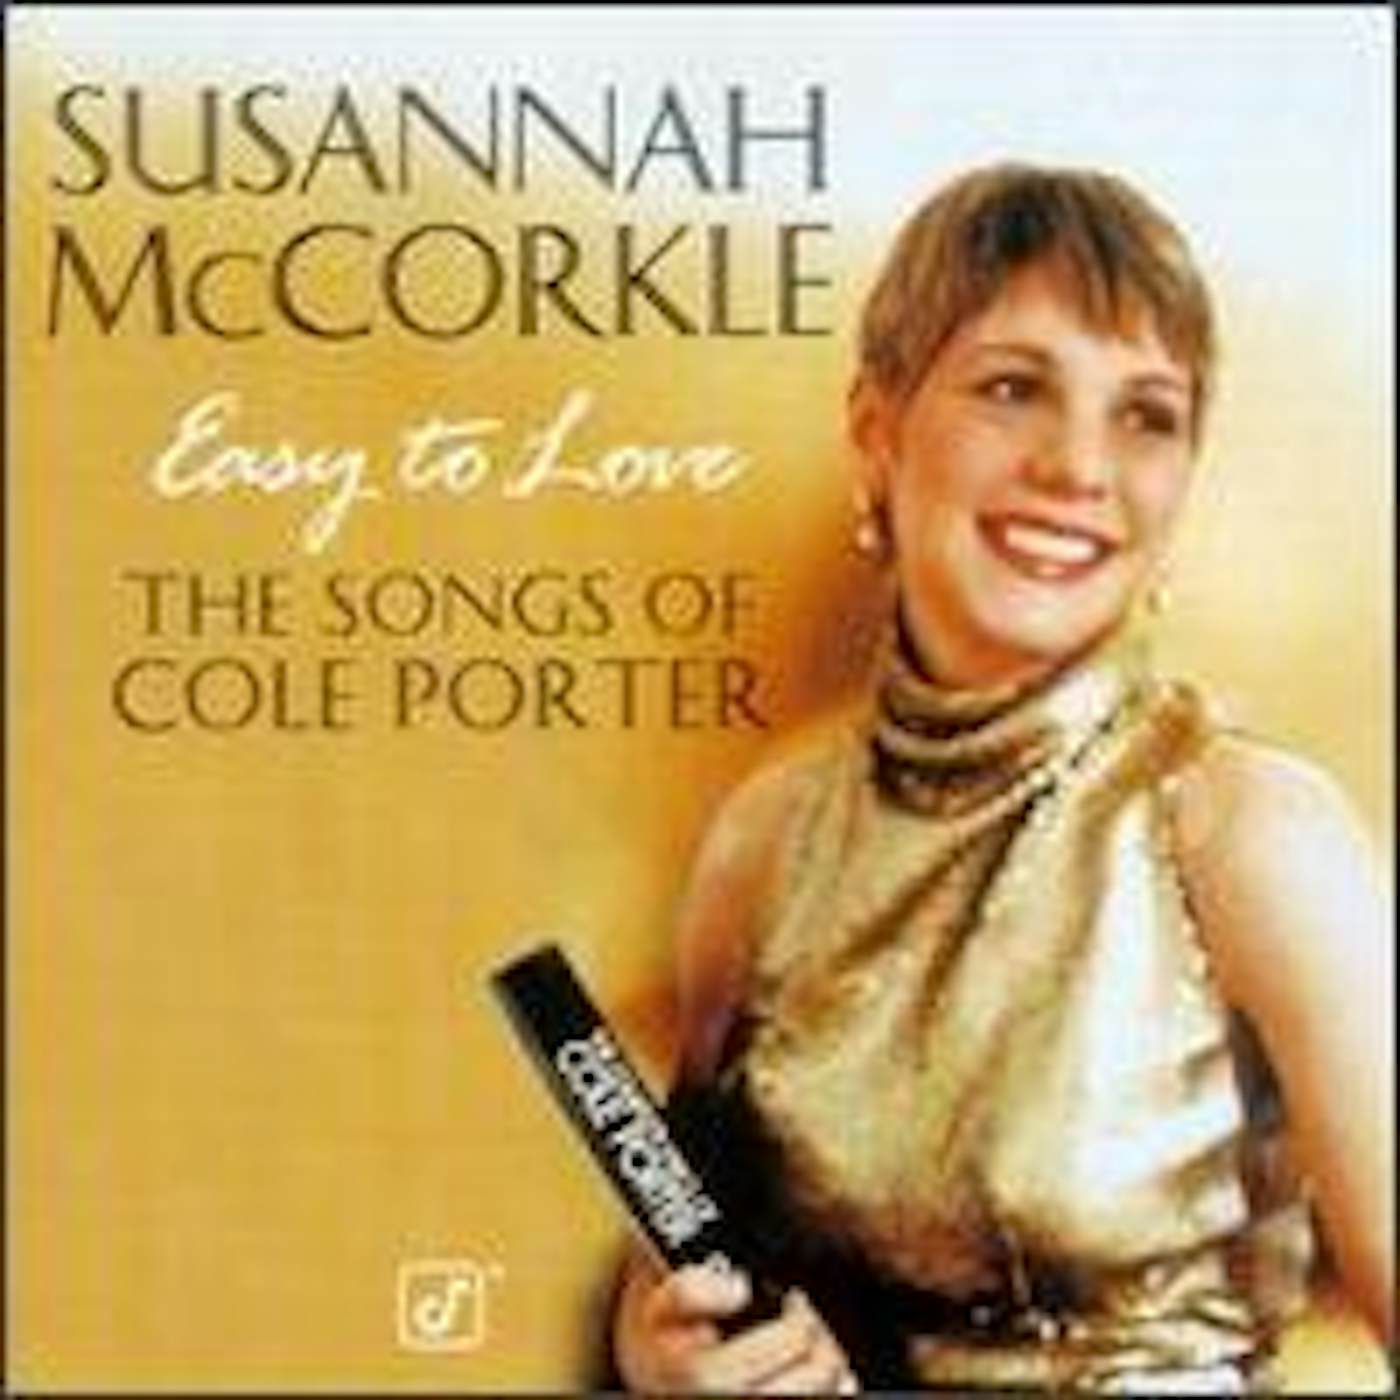 Susannah McCorkle EASY TO LOVE: SONGS OF COLE PORTER CD